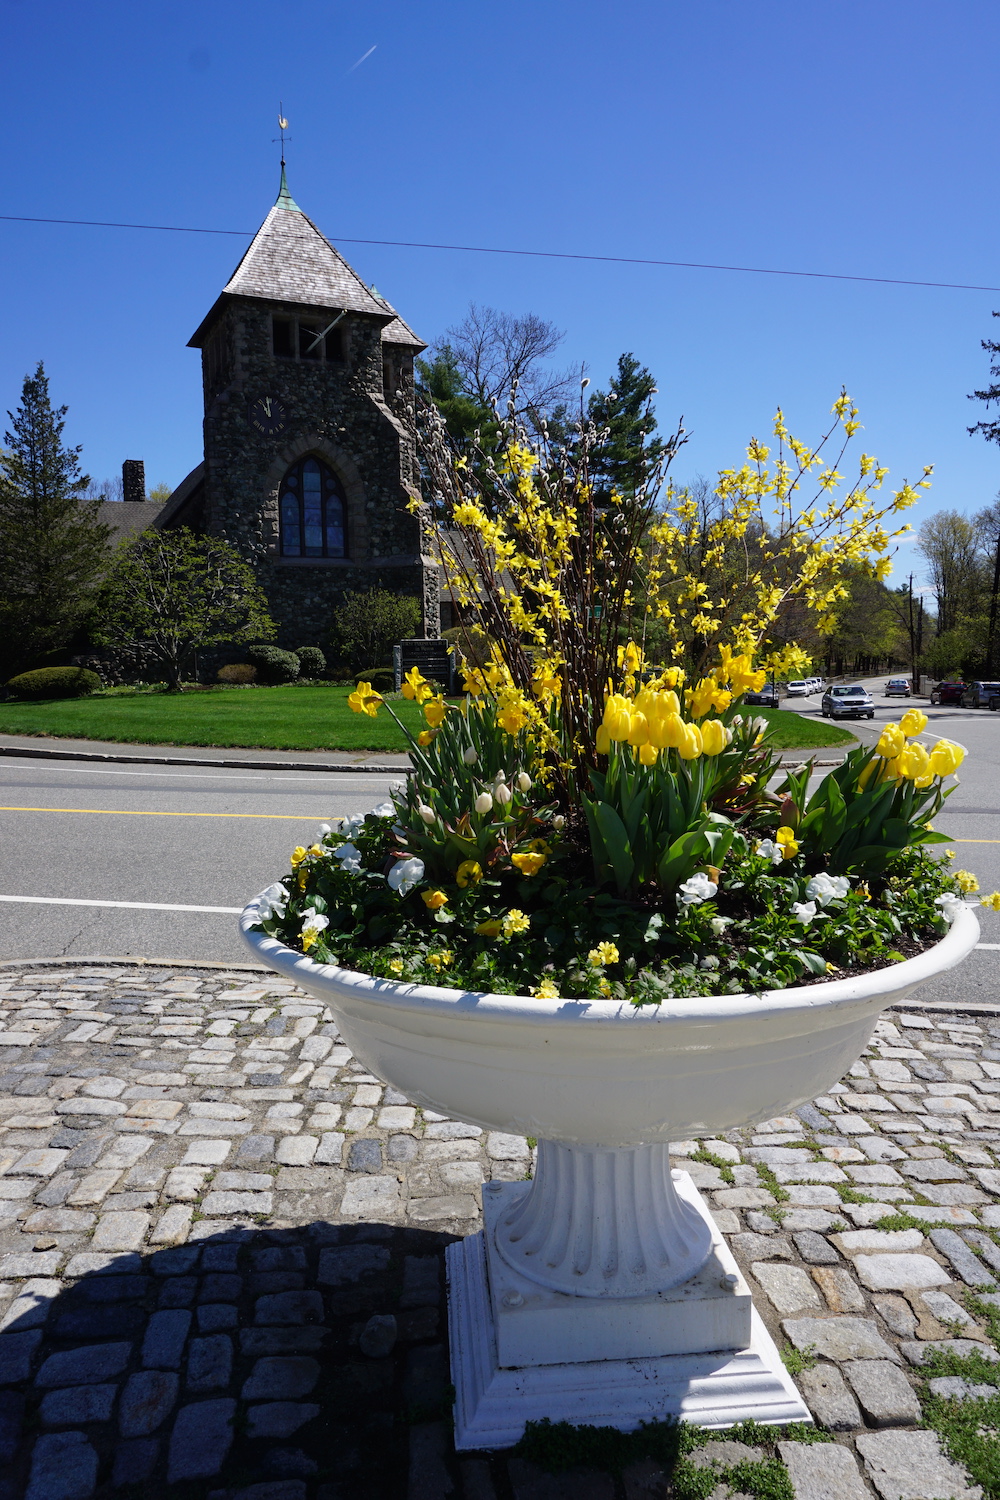 Watering trough with yellow flowers with First Parish Church in background on clear sunny day.